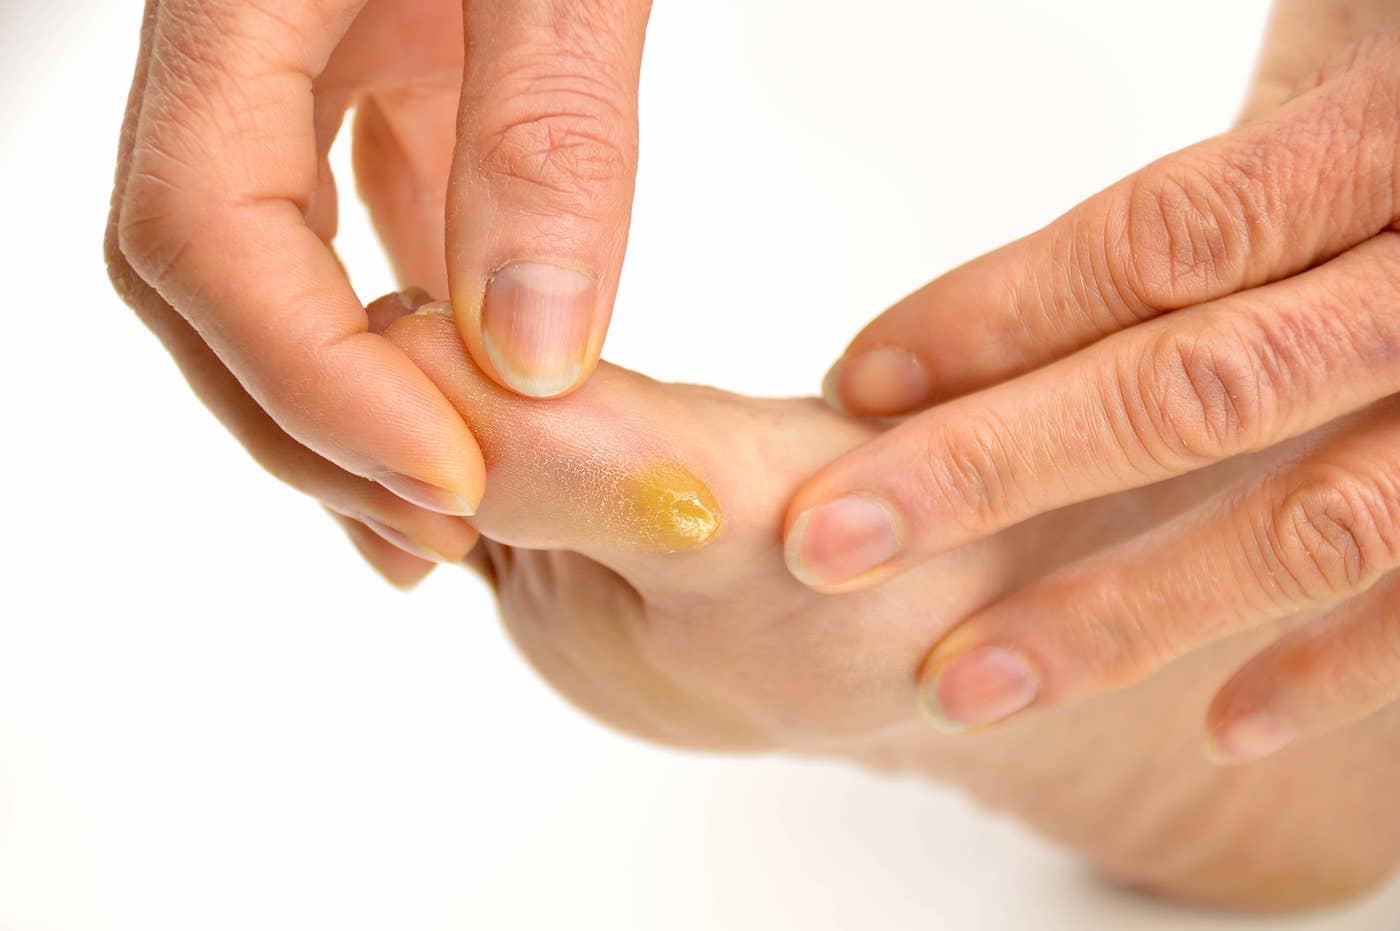 How Do You Get Rid Of Calluses Permanently? 